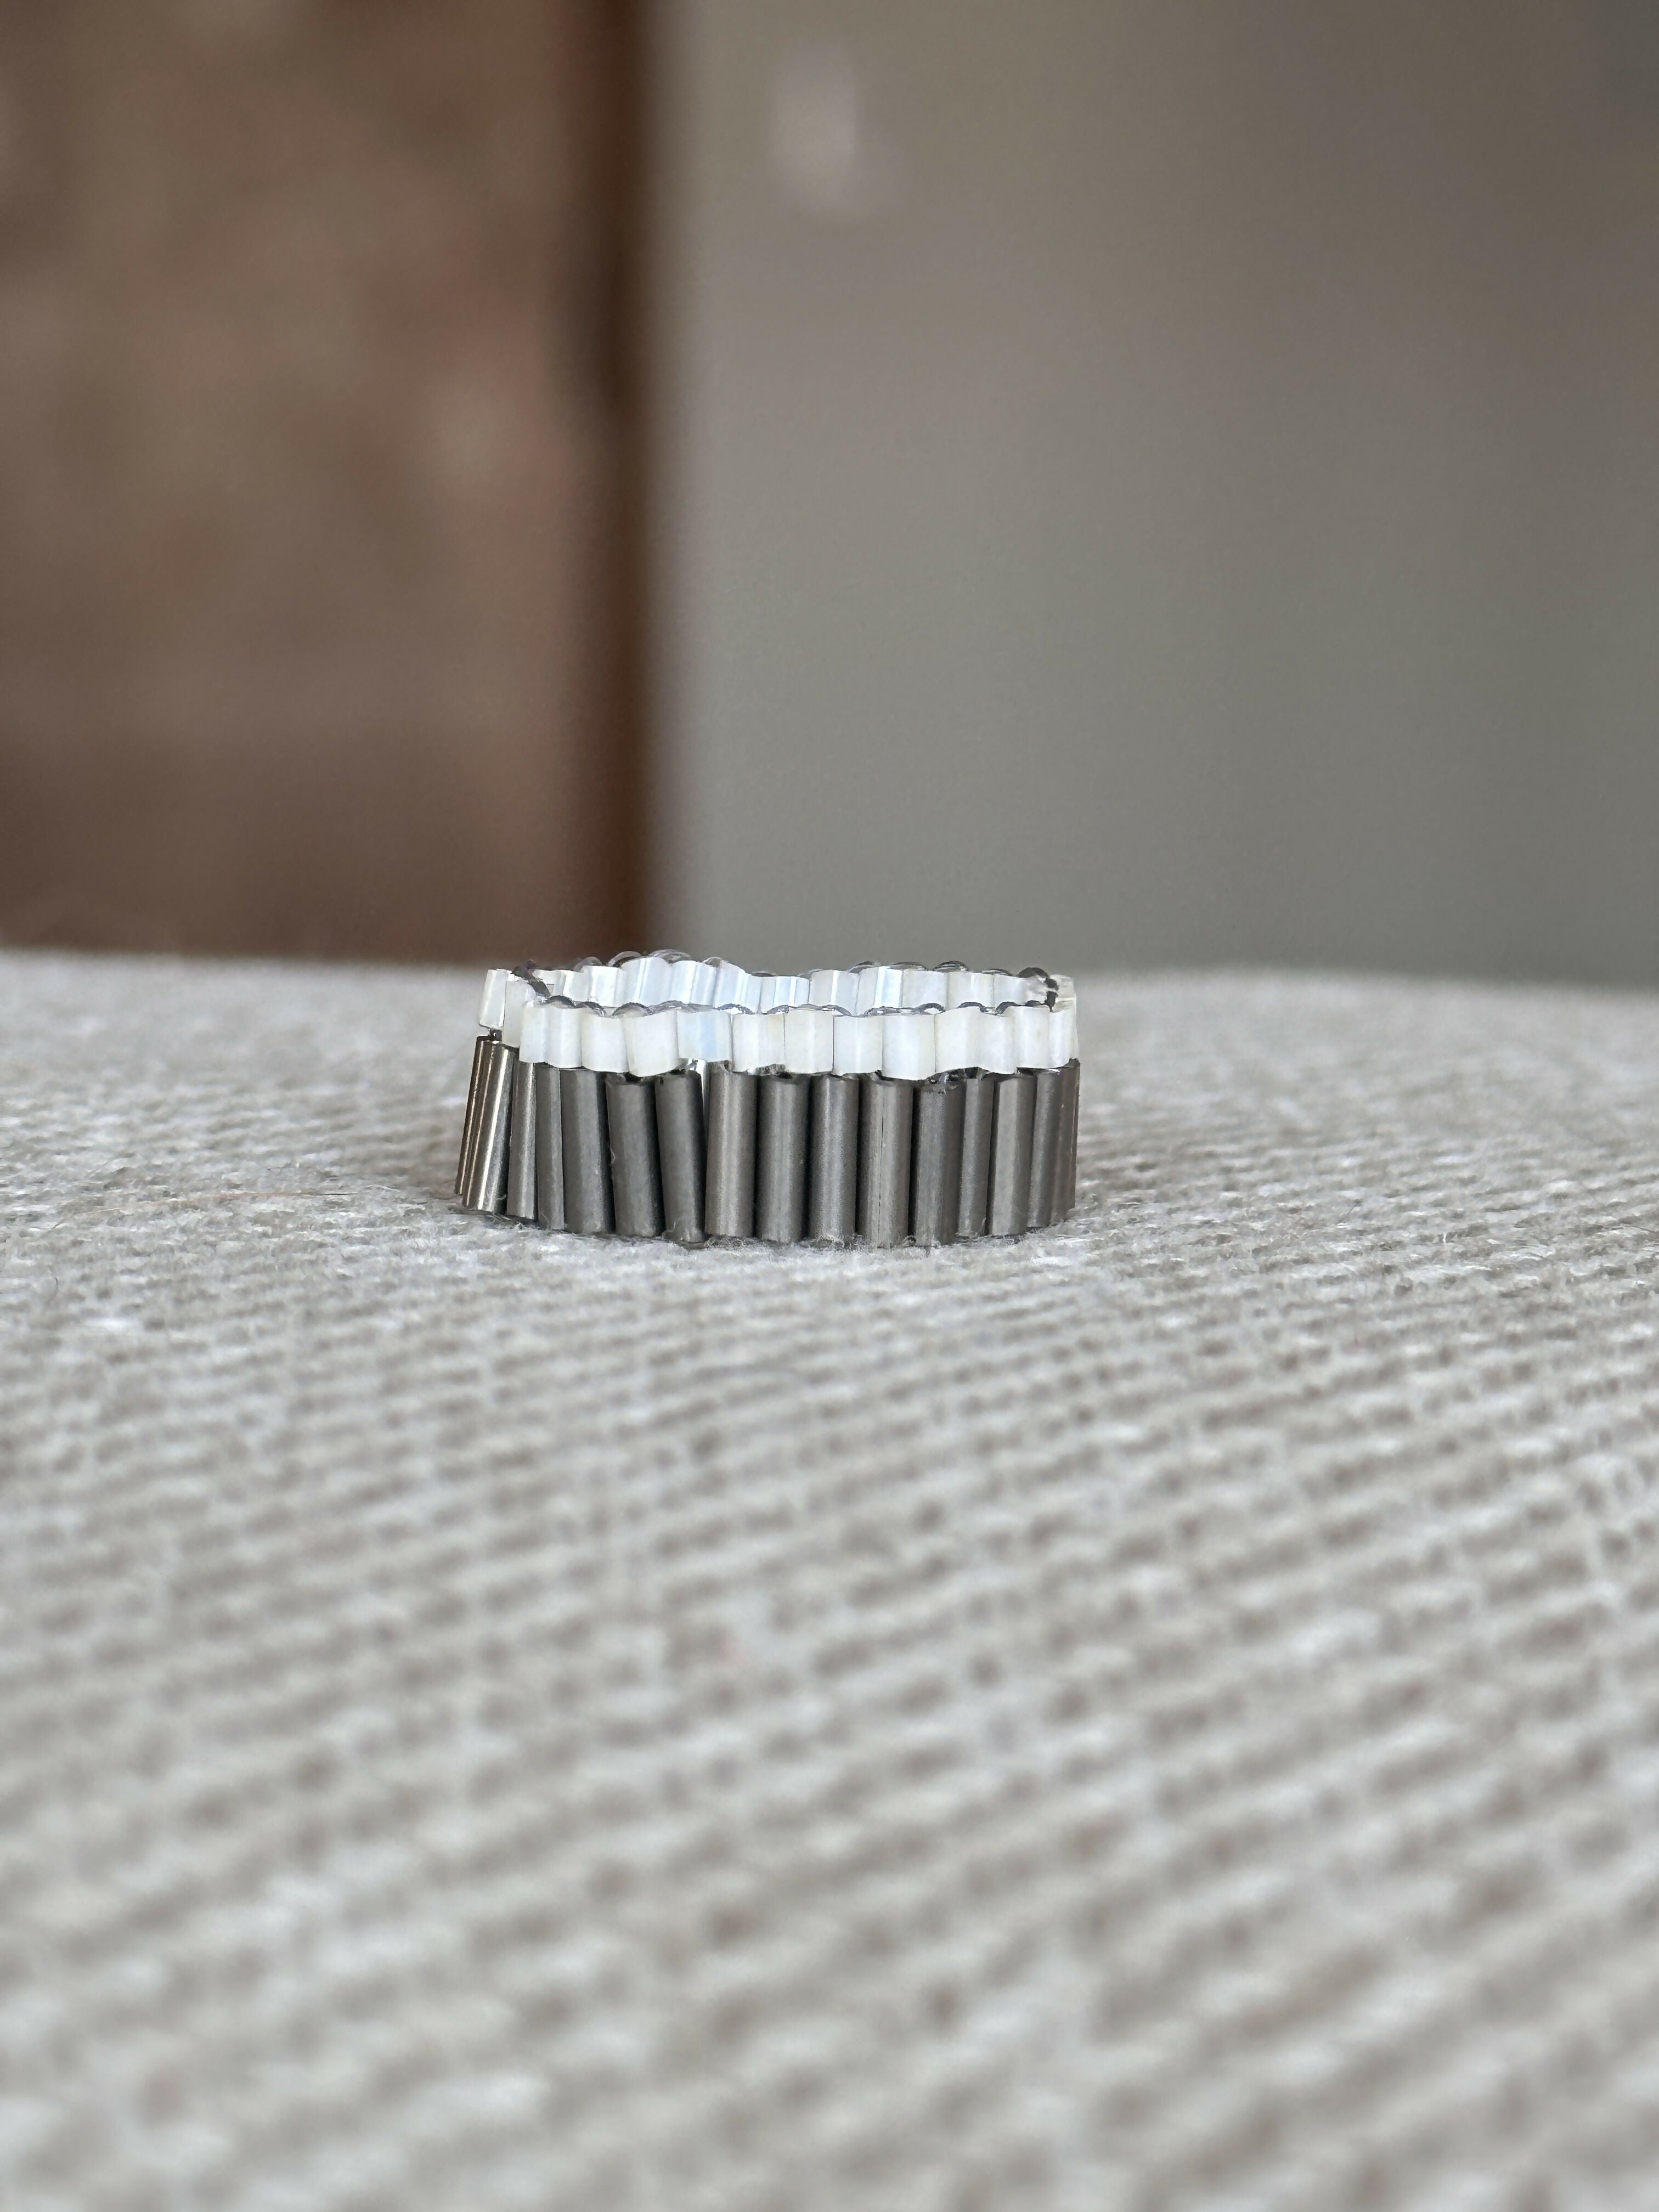 The PUT A RING ON IT collection: Lines serie 10, 1 row + 1 long row!